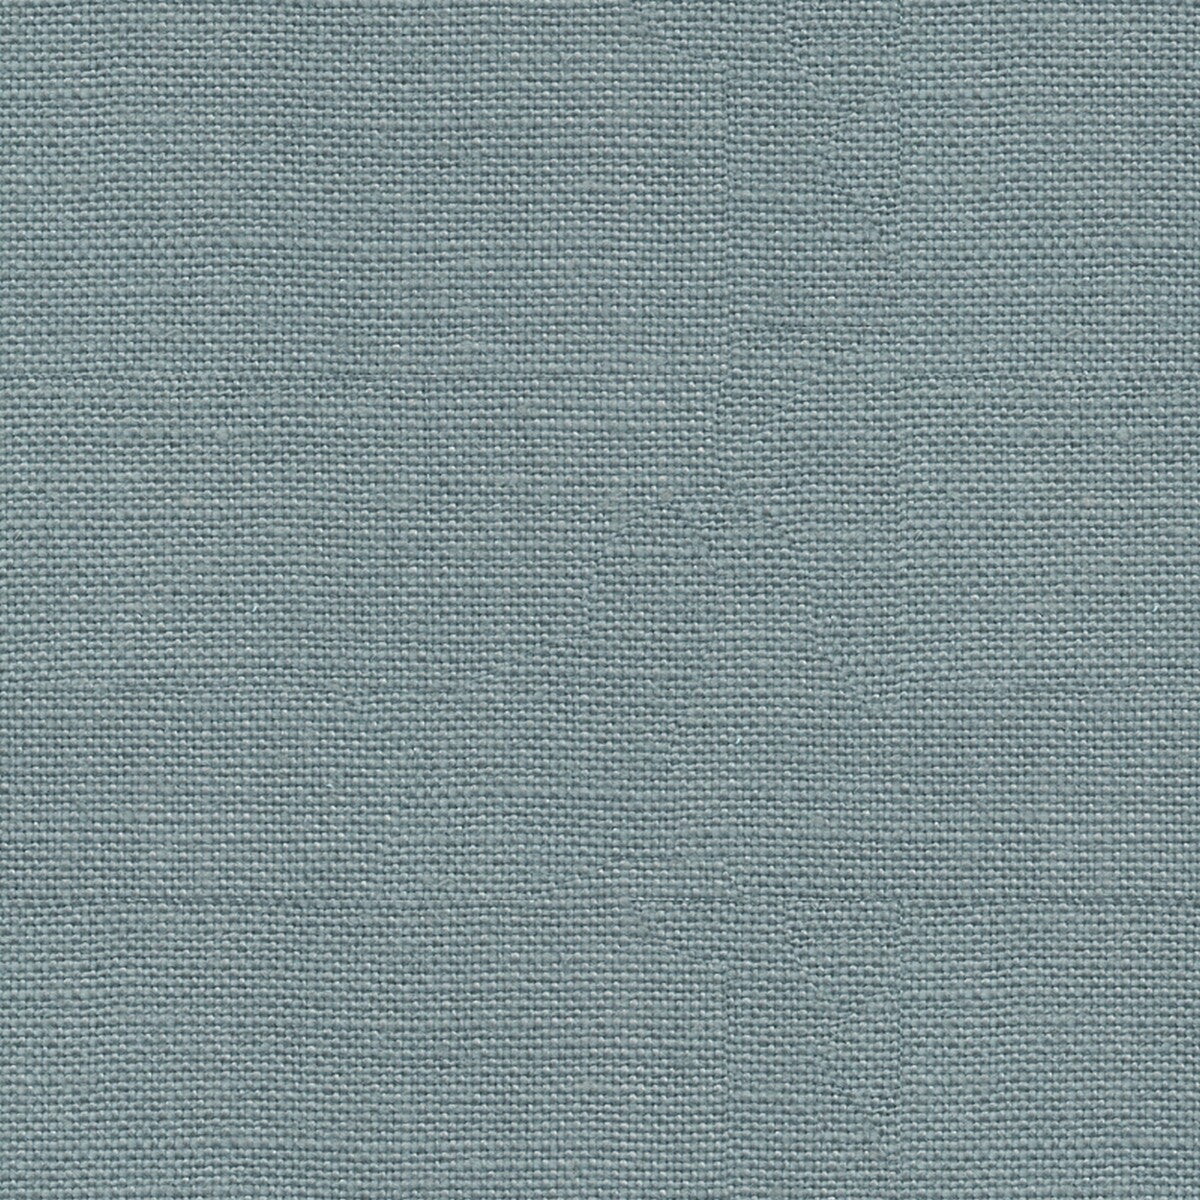 Newport fabric in aqua color - pattern ED85116.725.0 - by Threads in the Variation collection